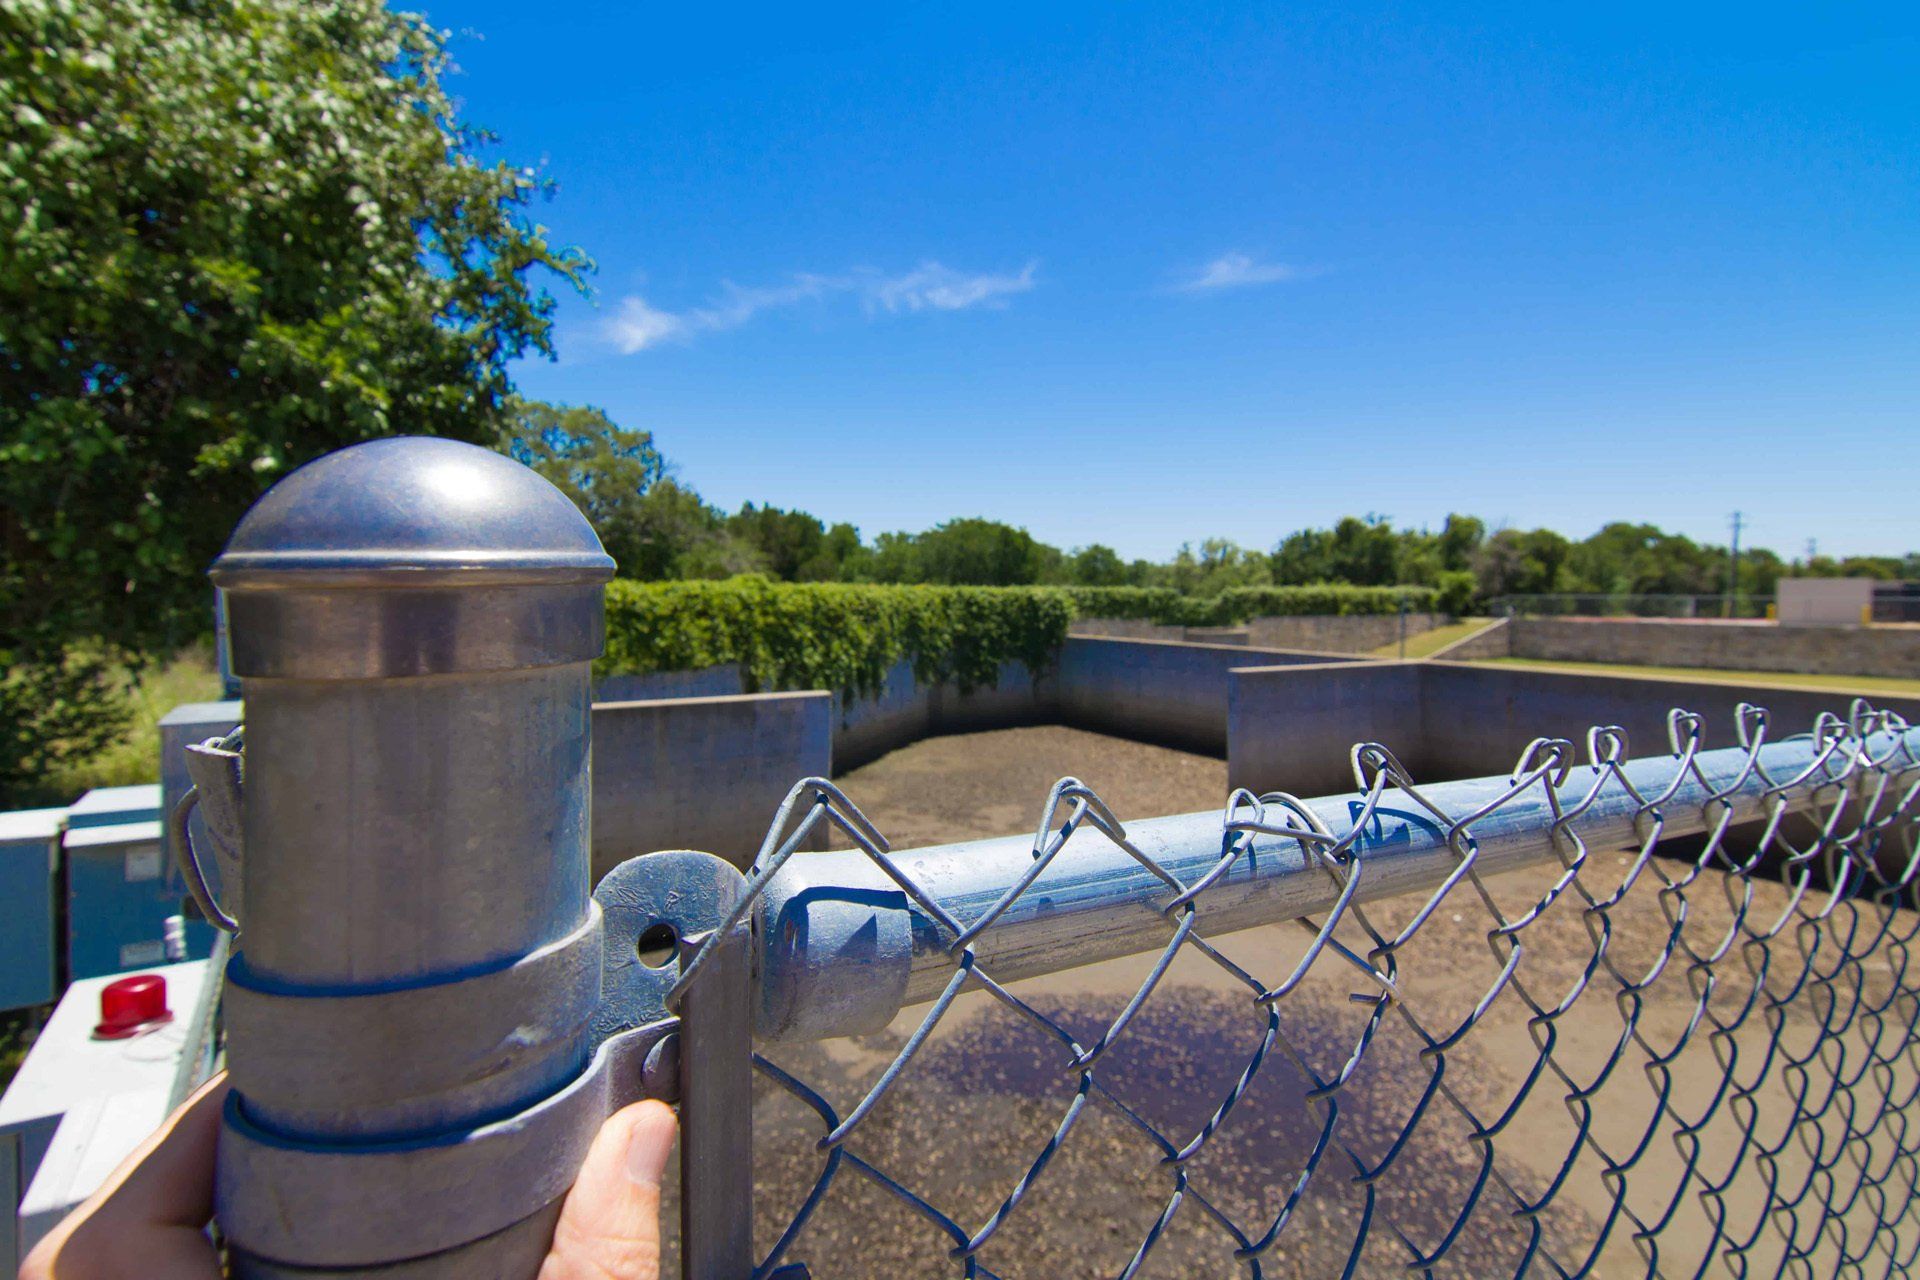 Chain link fence is an inexpensive fencing solution